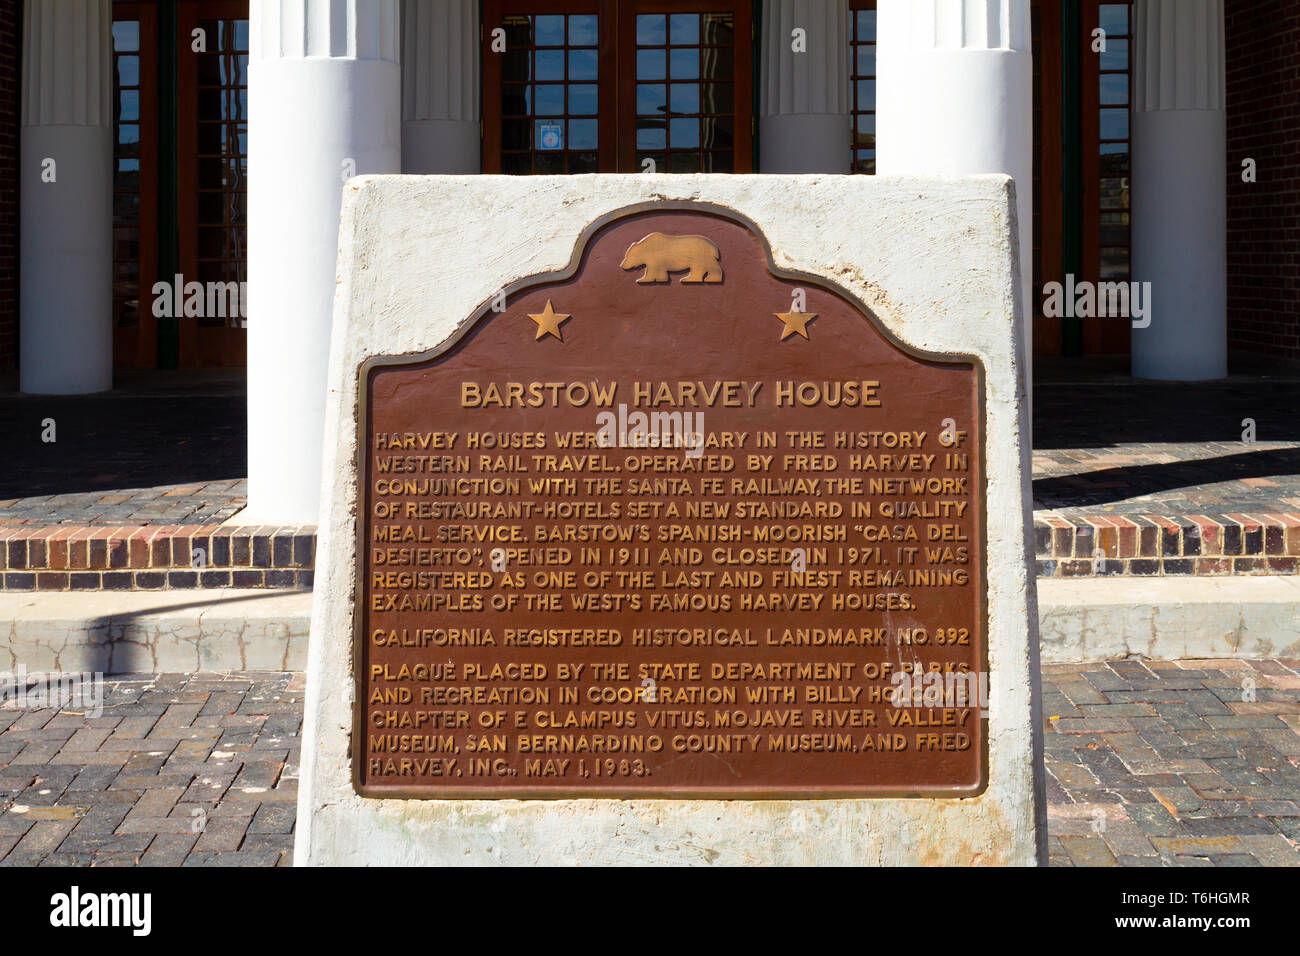 Barstow, CA / USA – April 14, 2019: Commemoration Plaque for the famous Barstow Harvey House located at 685 North 1st Avenue in Barstow, California. Stock Photo